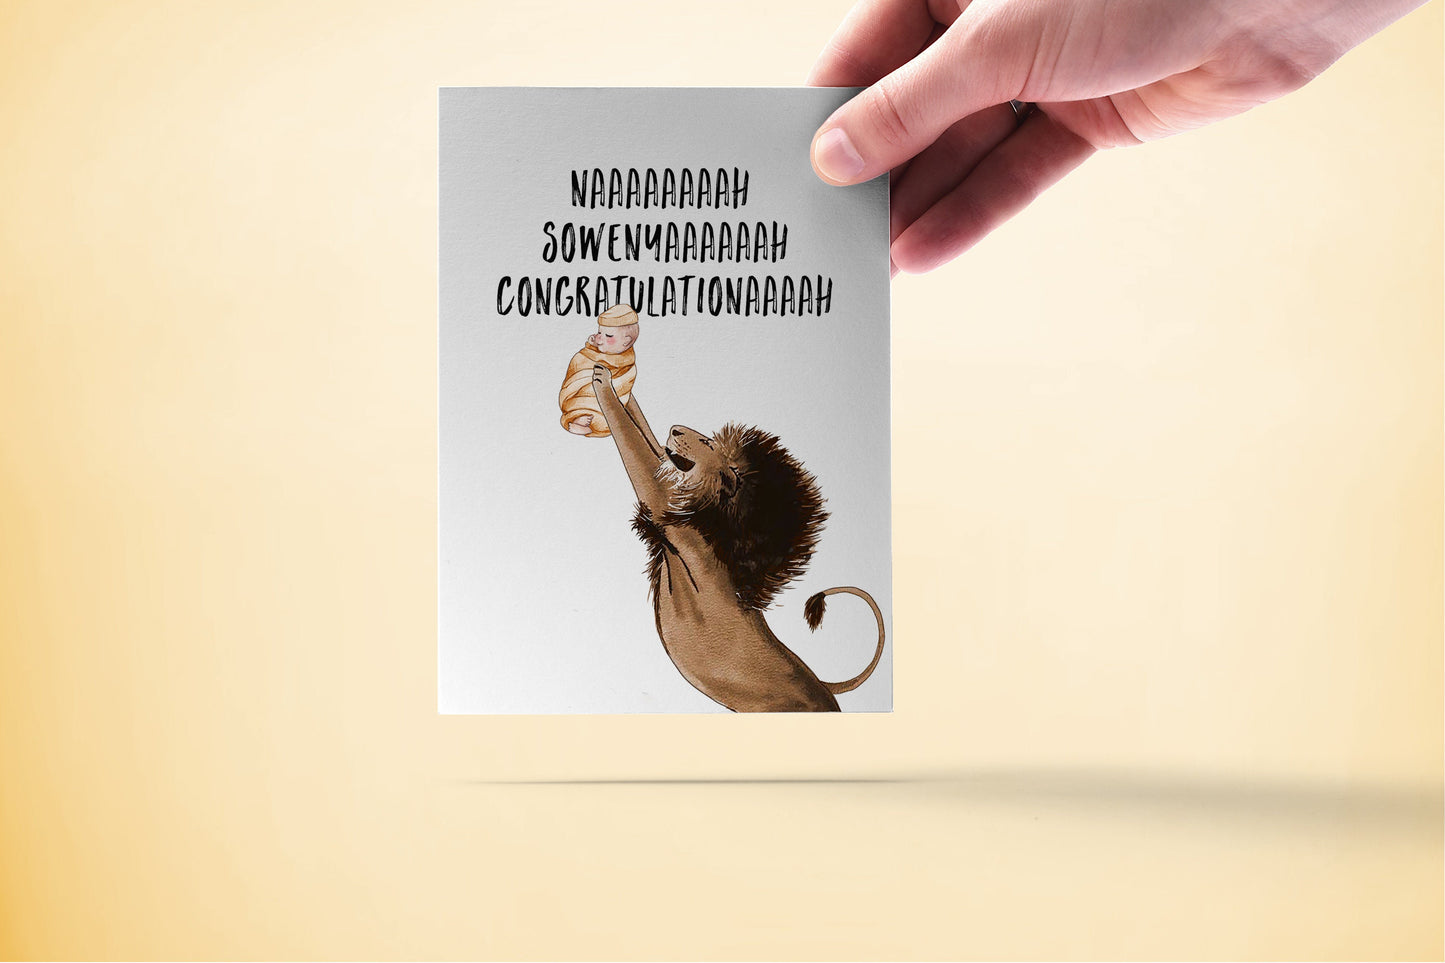 Lion King Baby Shower Cards Funny - Baby Boy First Birthday Card